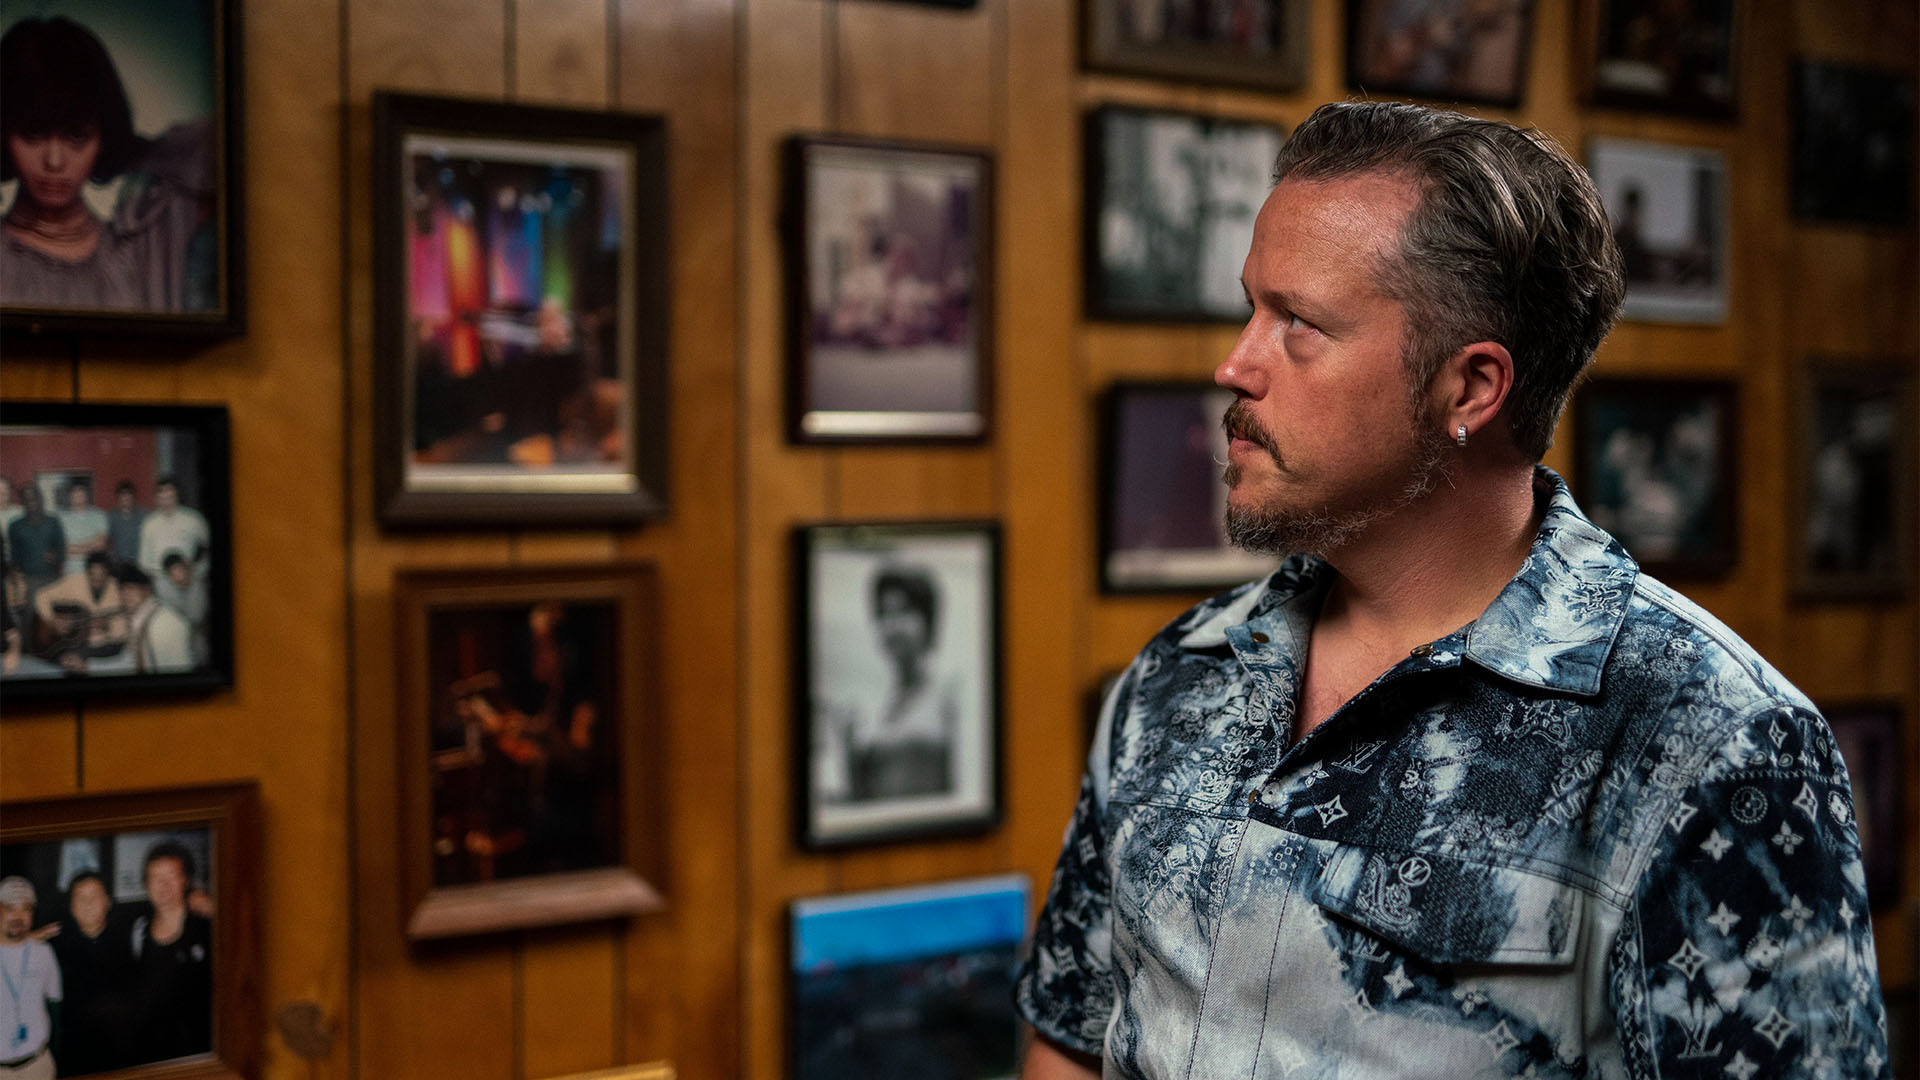 Musician Jason Isbell looks at photos at Fame Recording Studios in Muscle Shoals, Alabama.